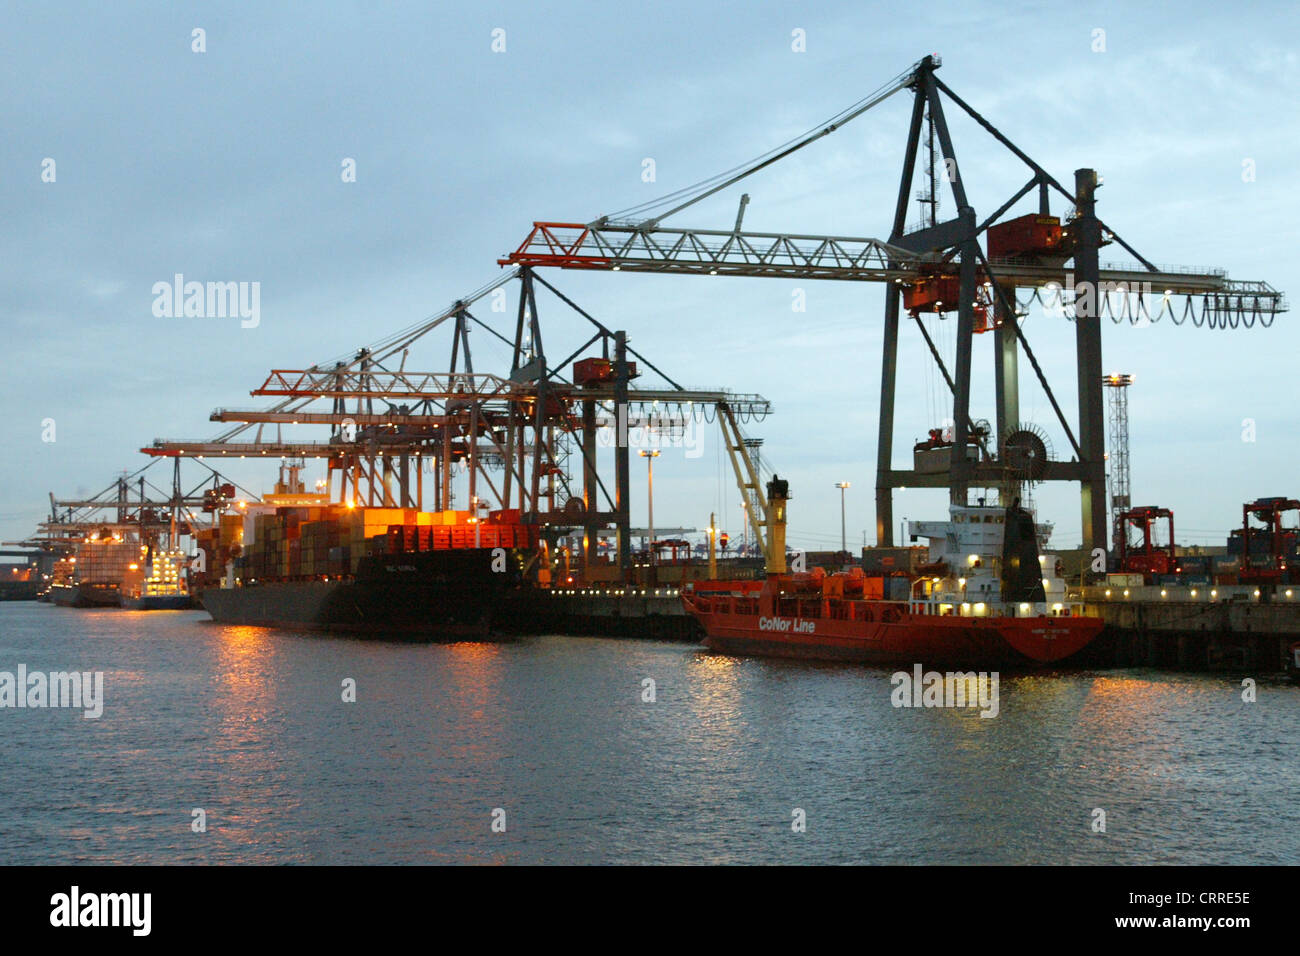 The container port of Hamburg in the evening light Stock Photo